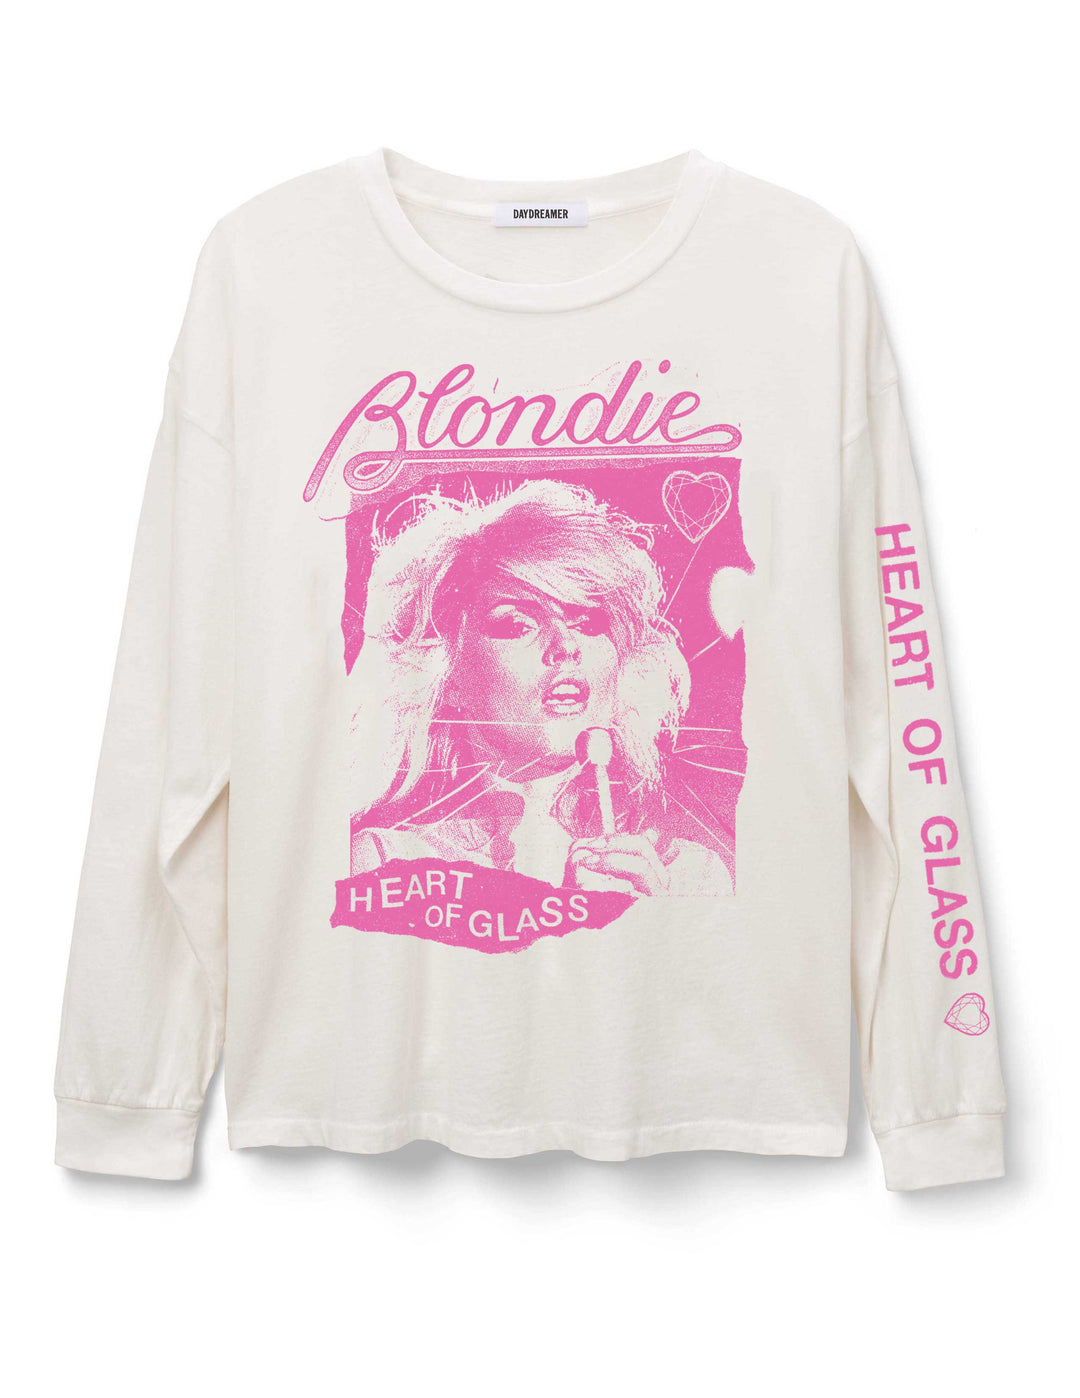 BLONDIE HEART OF GLASS FLYER LONG SLEEVE MERCH-VINTAGE WHITE - Kingfisher Road - Online Boutique